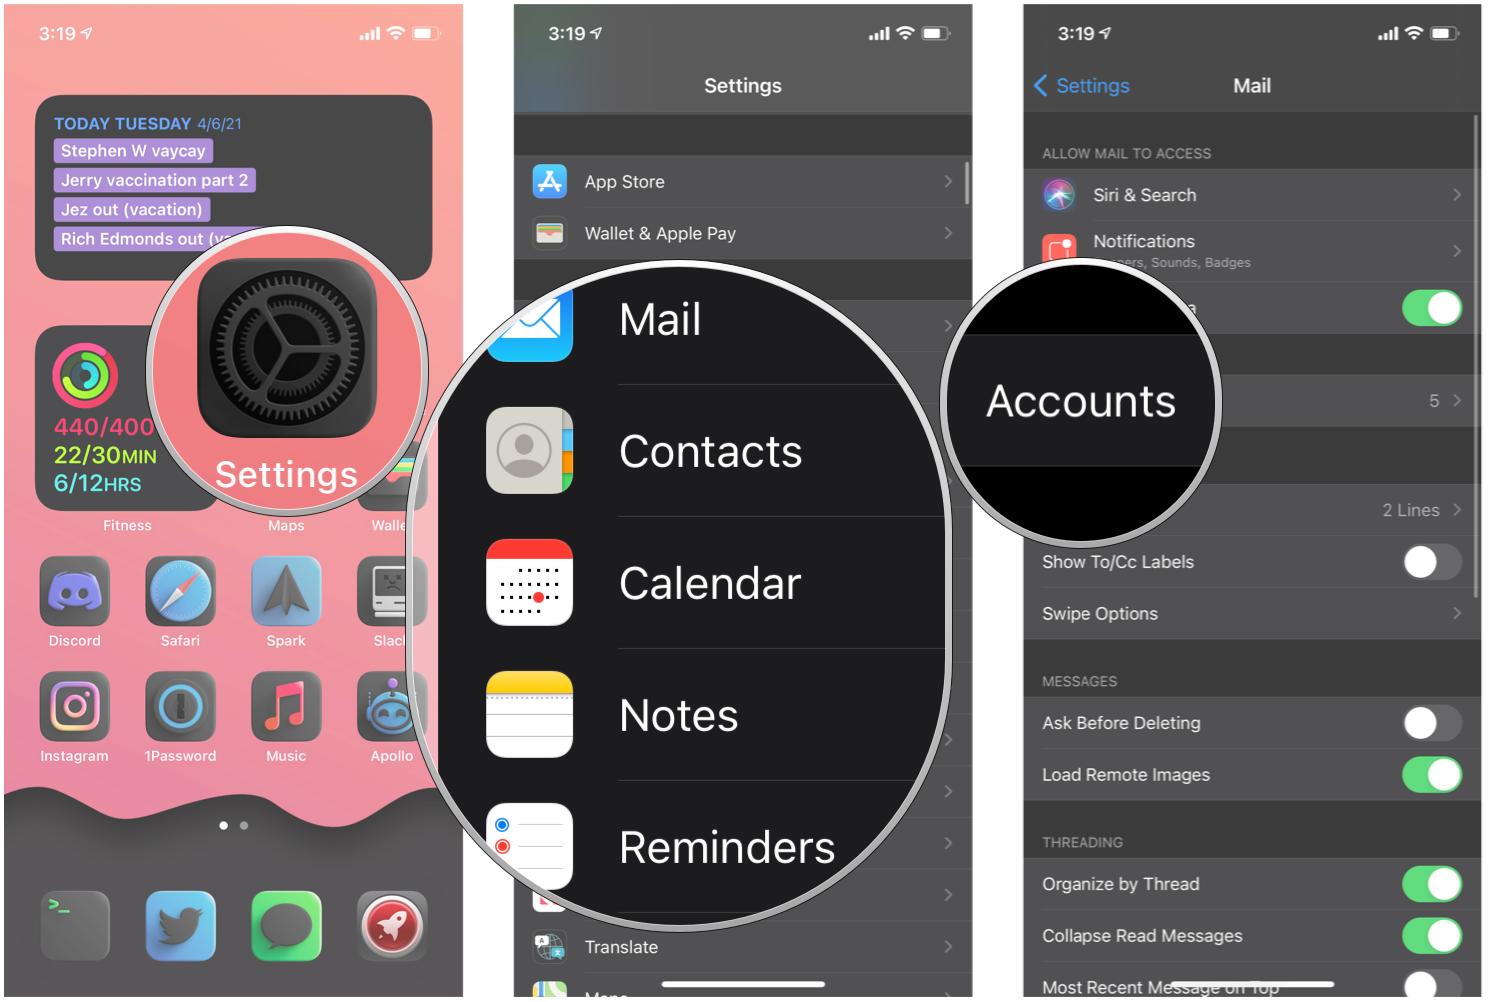 How to add a second Apple ID on the iPhone by showing steps: Launch Settings, tap one of the following: Mail, Contacts, Calendar, Notes, or Reminders, then tap Accounts